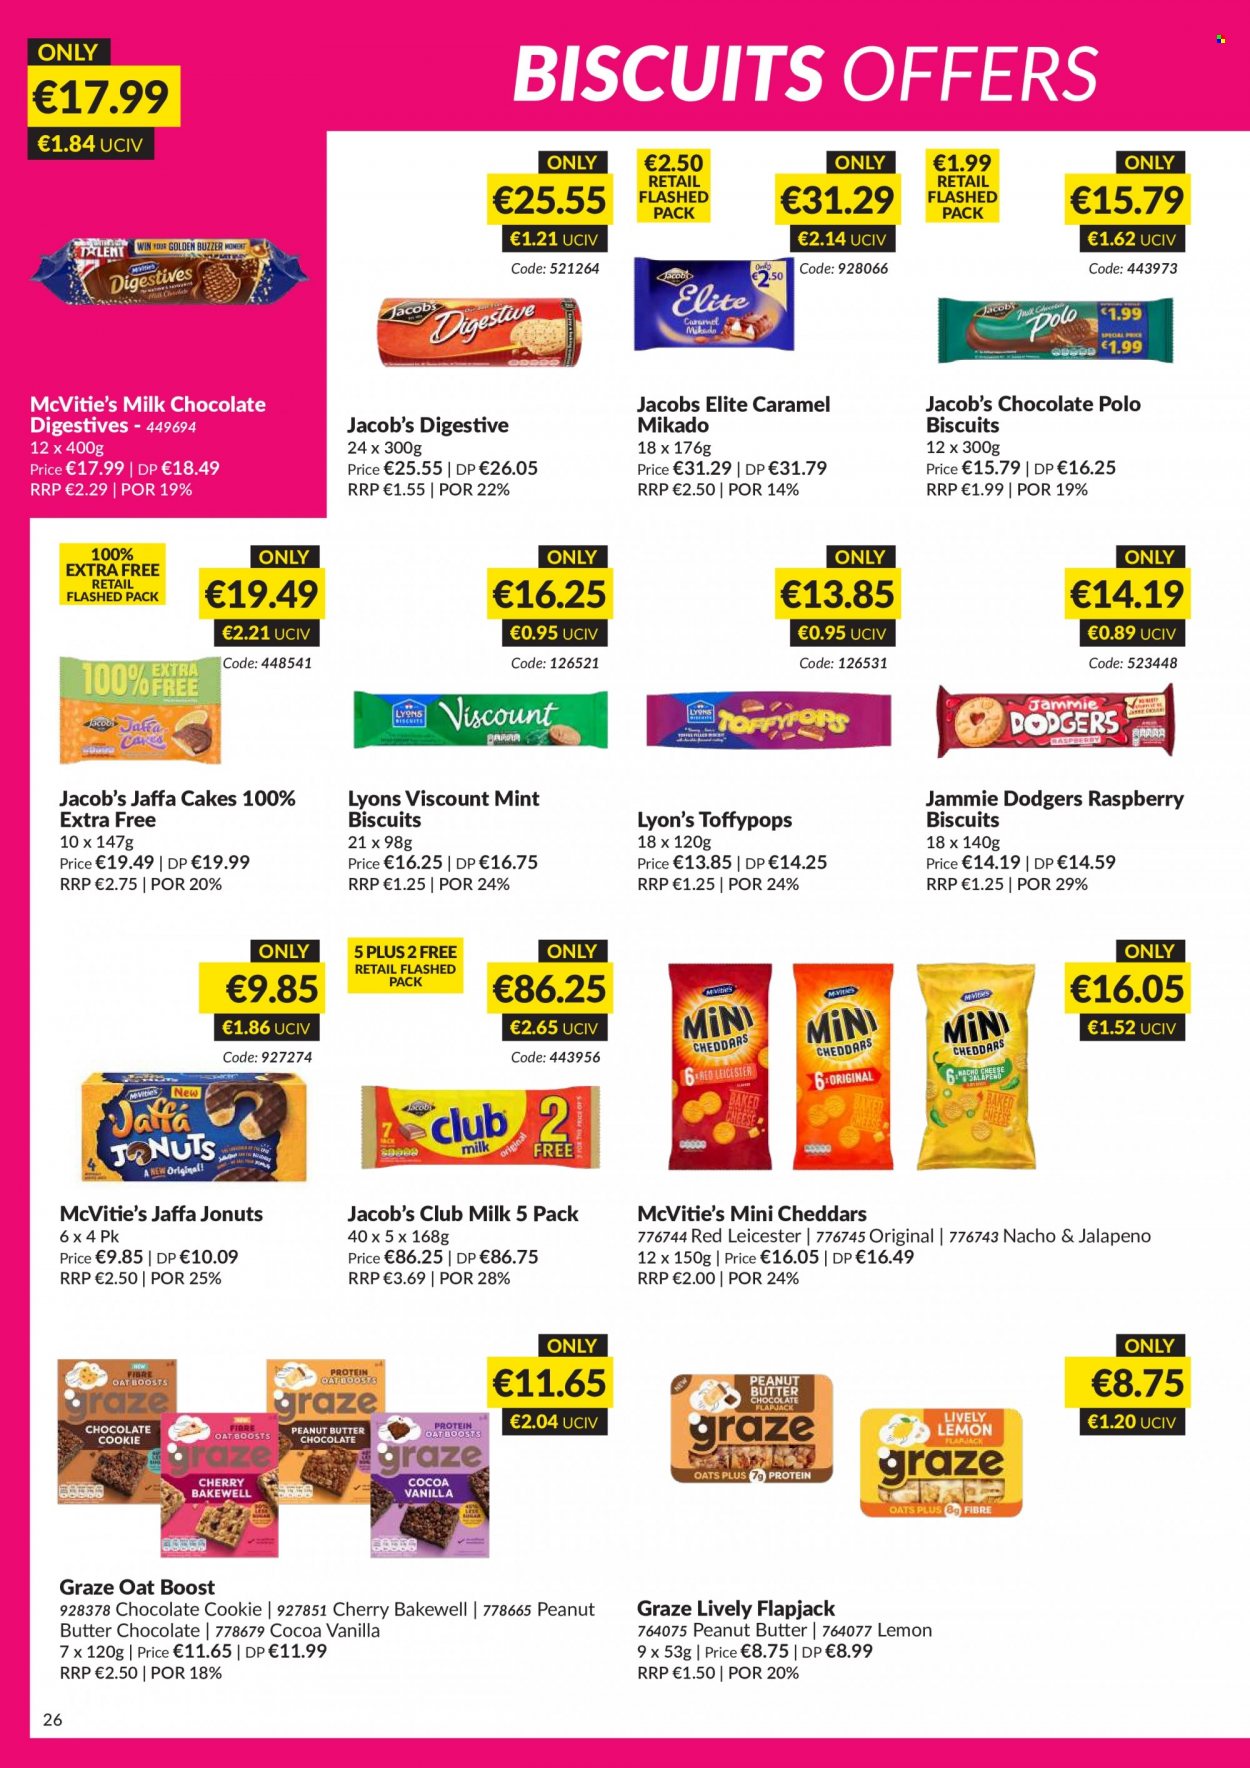 thumbnail - MUSGRAVE Market Place offer  - 31.07.2022 - 27.08.2022 - Sales products - cake, cherries, Red Leicester, milk chocolate, chocolate, biscuit, club milk, Digestive, cocoa, oats, caramel, peanut butter, Graze, Boost, Lyons, Jacobs. Page 26.